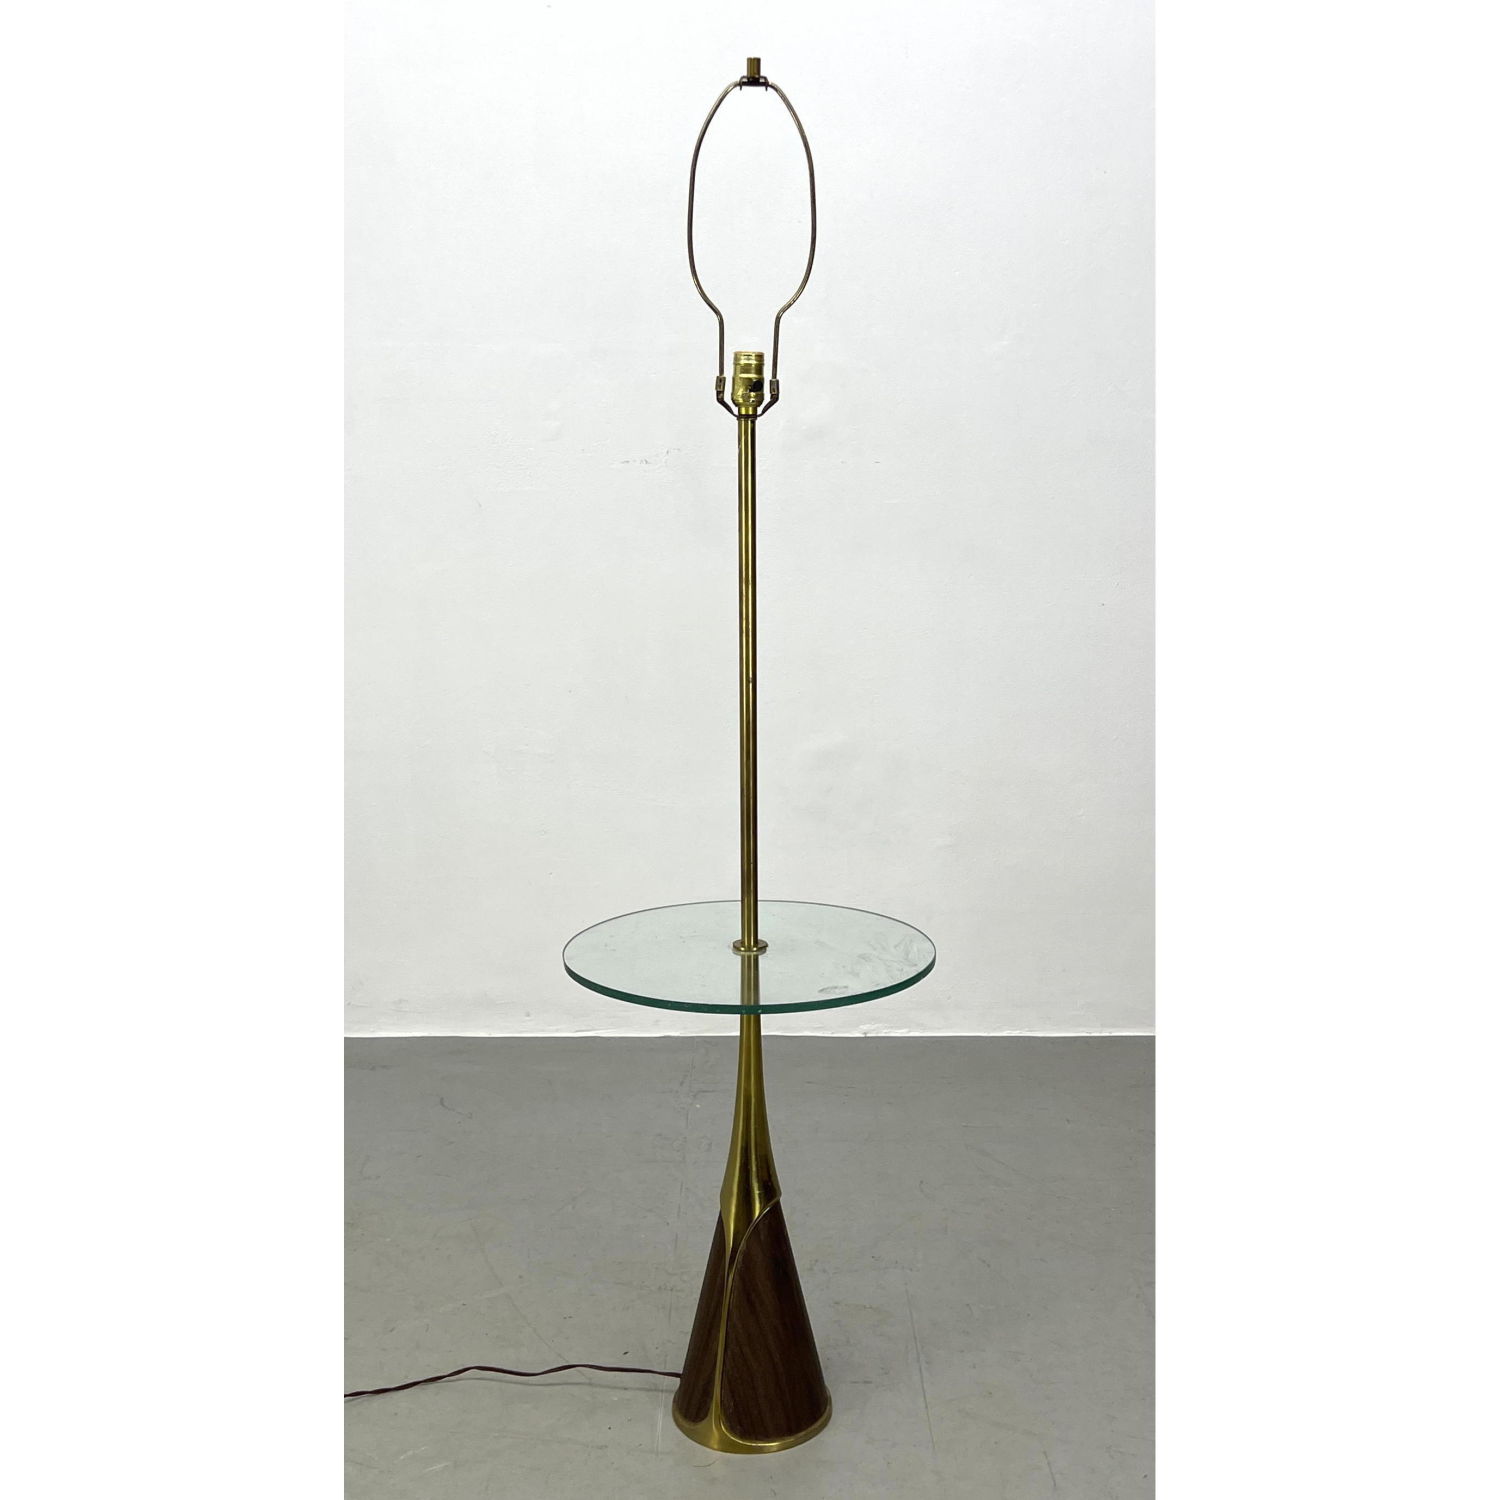 Laurel Lamp. Brass tone with wood